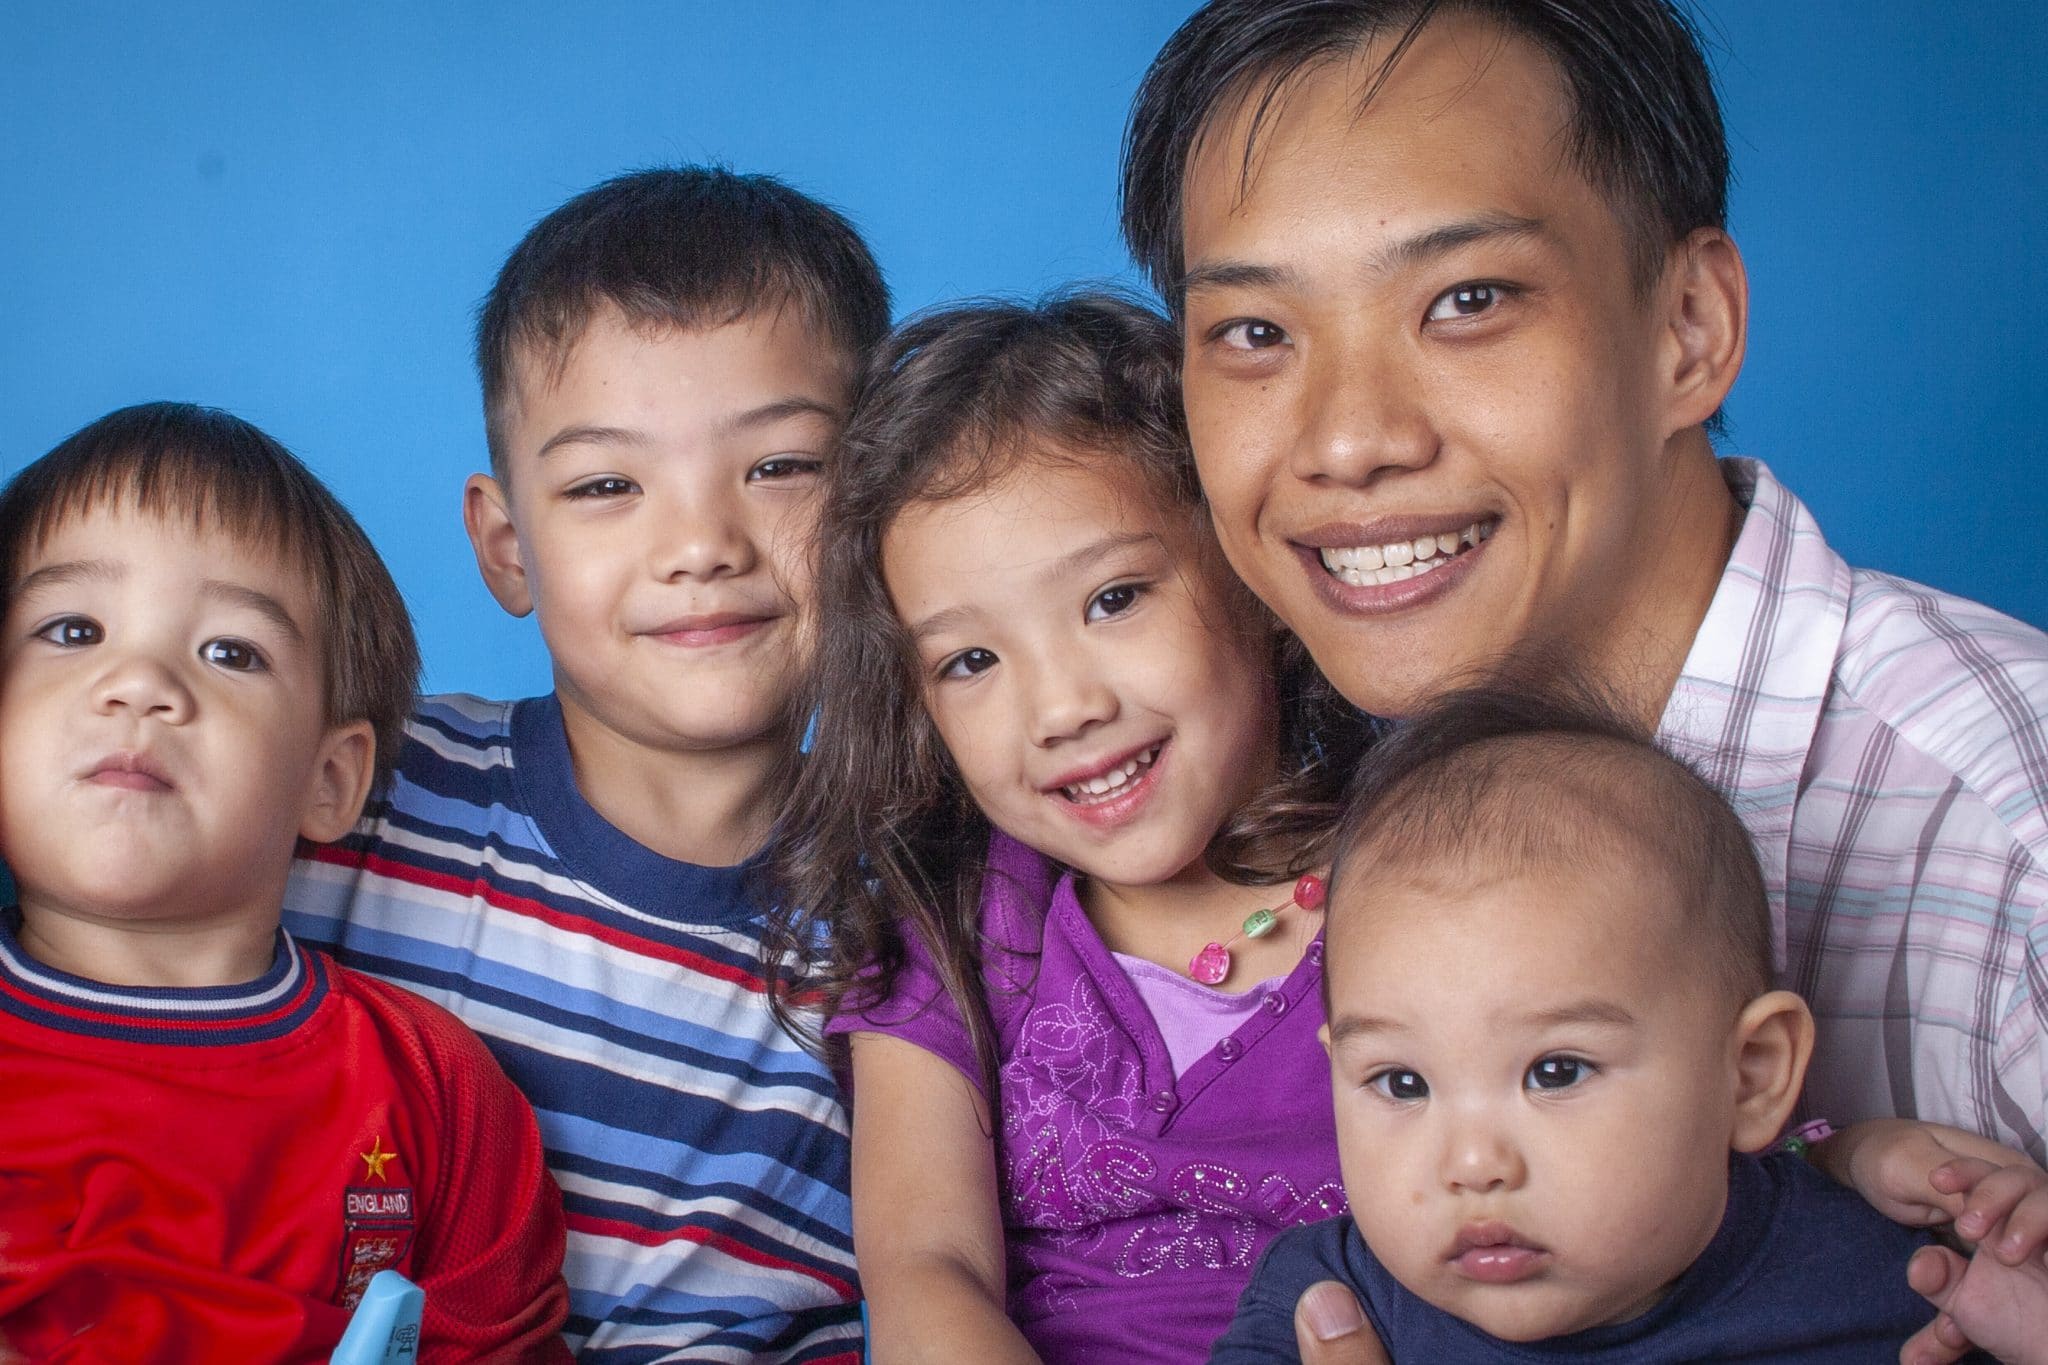 He’s a single dad who raised 4 kids on his own – but almost gave up